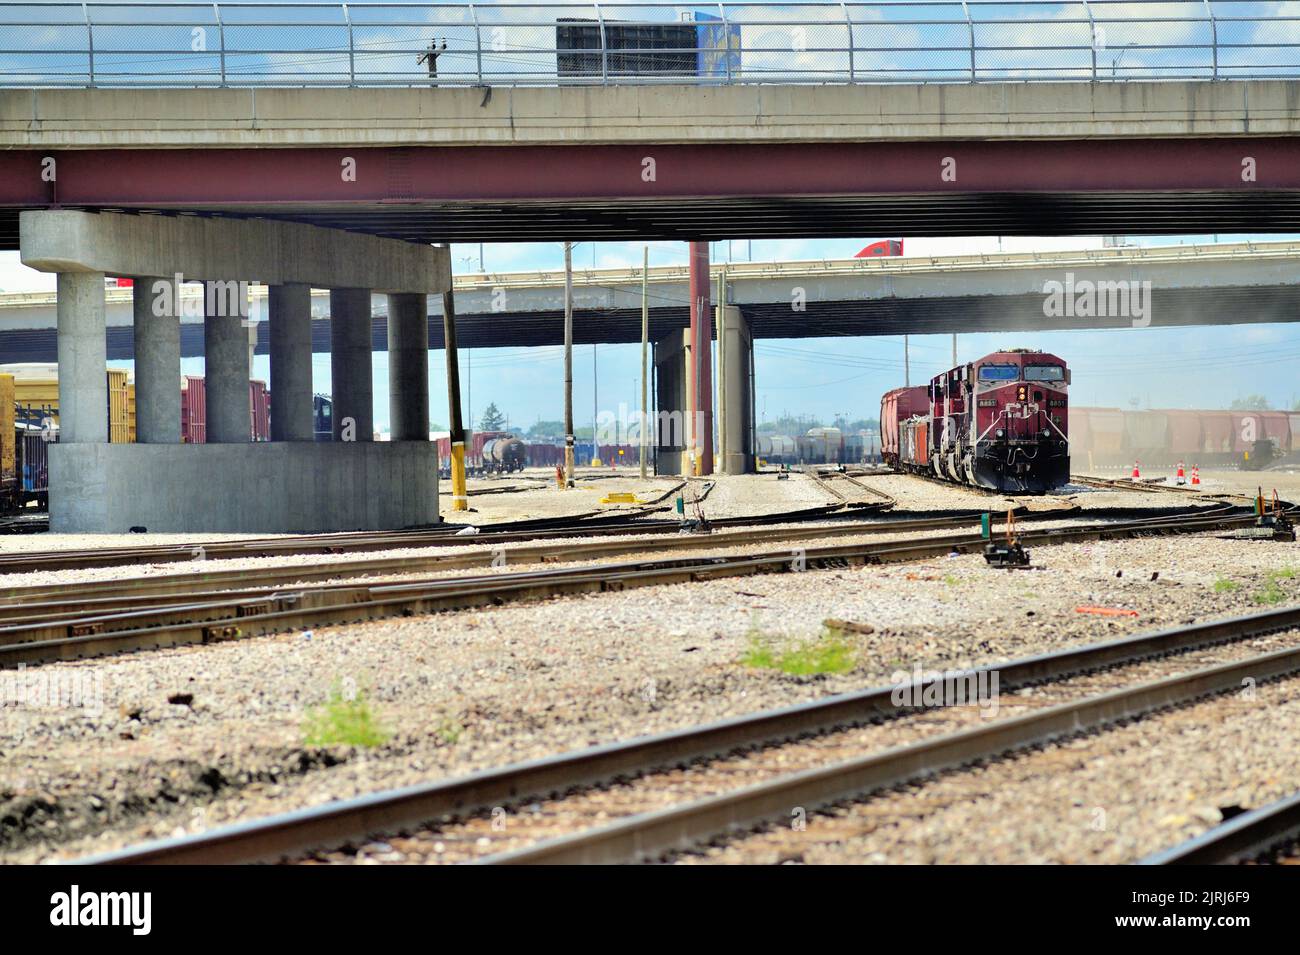 Franklin Park, Illinois, USA. Canadian Pacific Railway locomotives sit under a highway overpass leading a freight train awaiting departure from a yard. Stock Photo